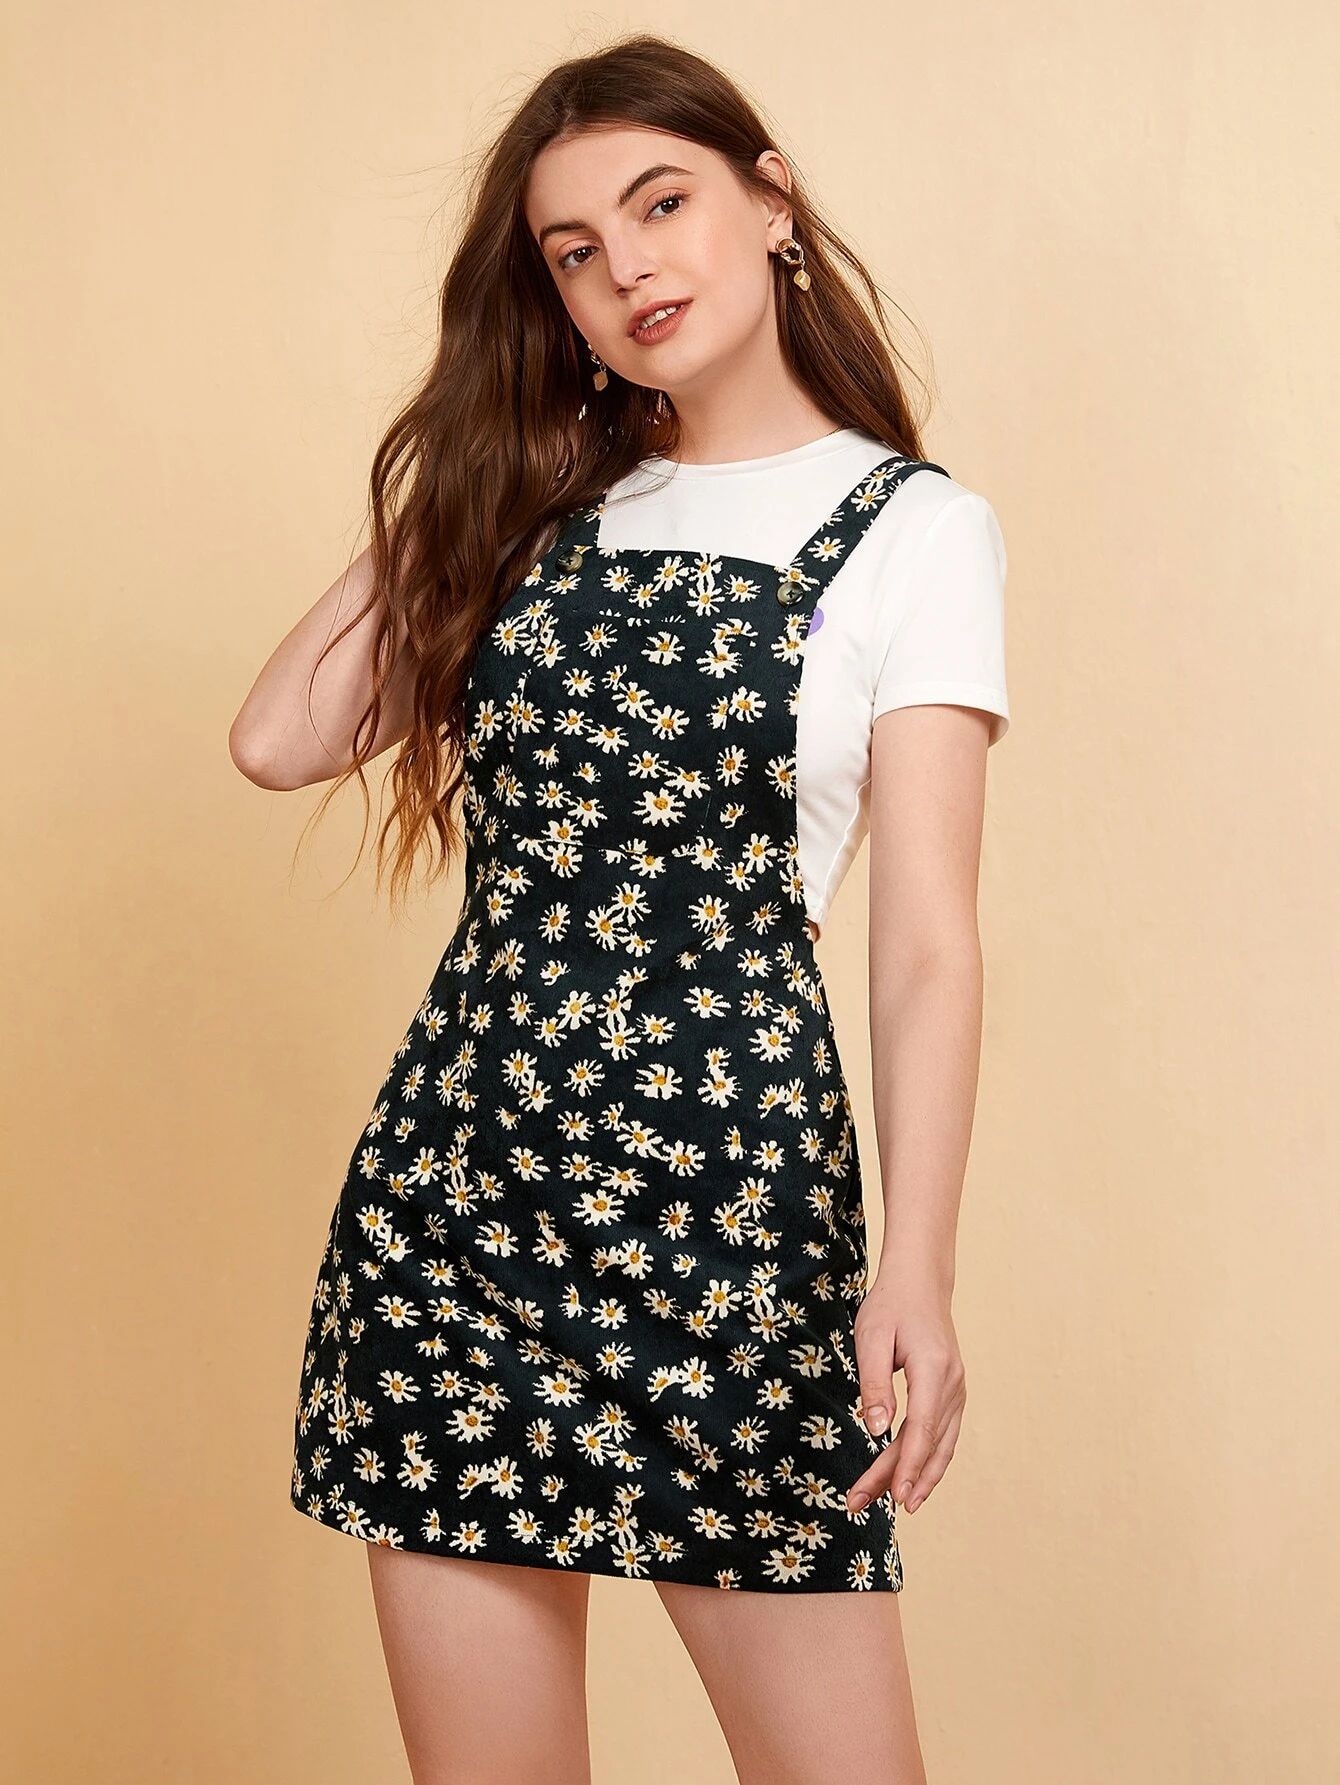 SHEIN Daisy Floral Cord Overall Dress | SHEIN